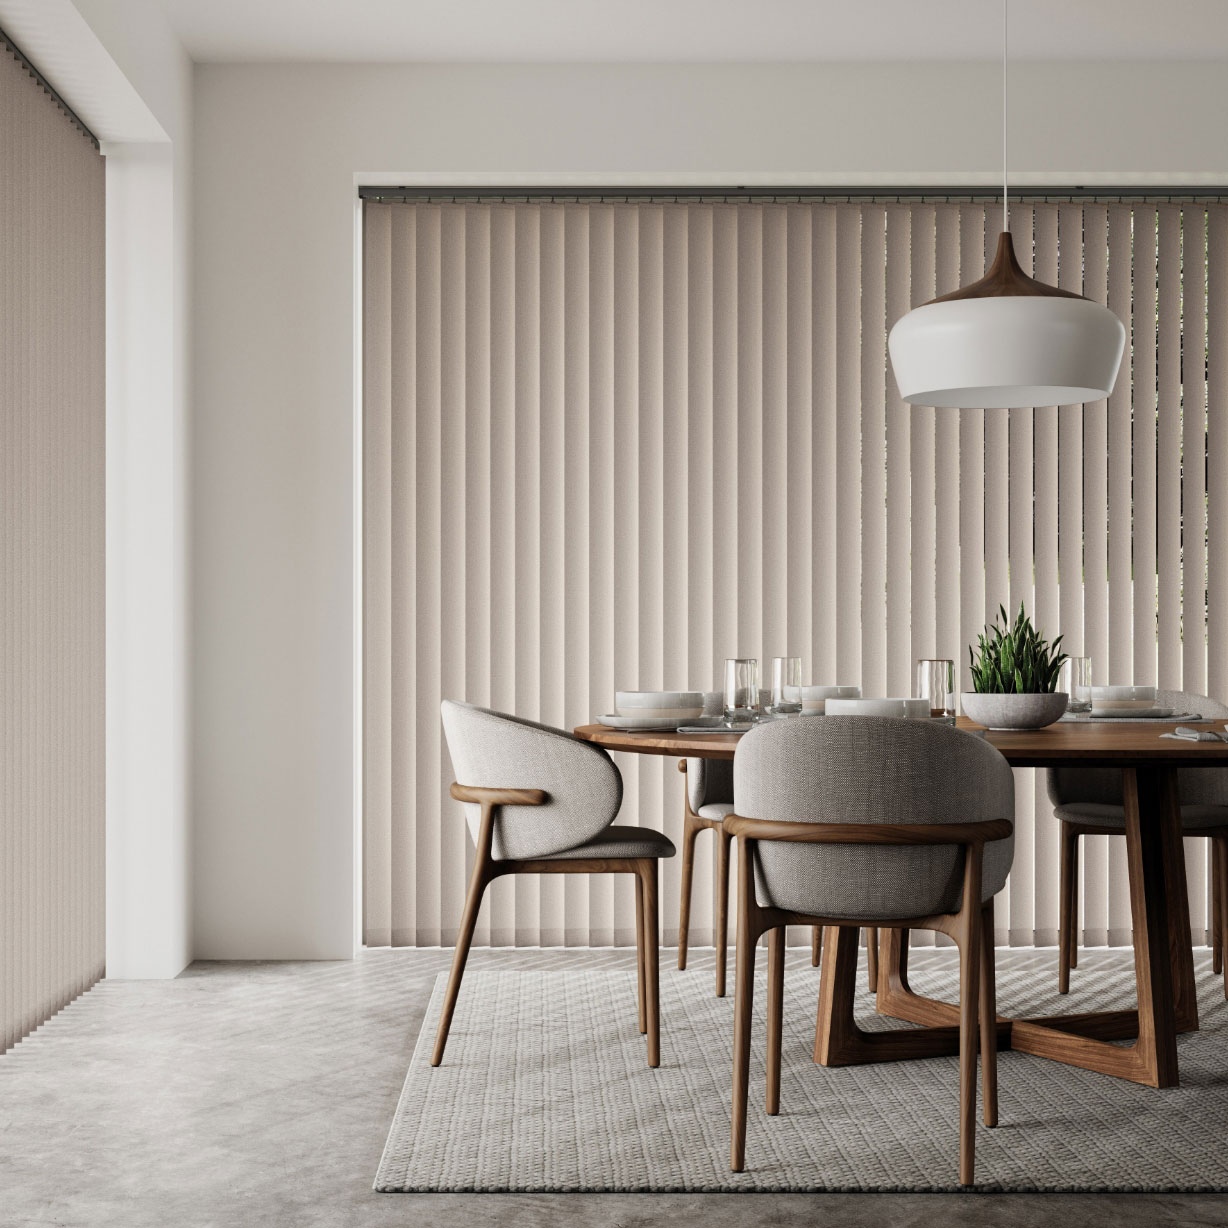 Cream Vertical Blinds in dining room